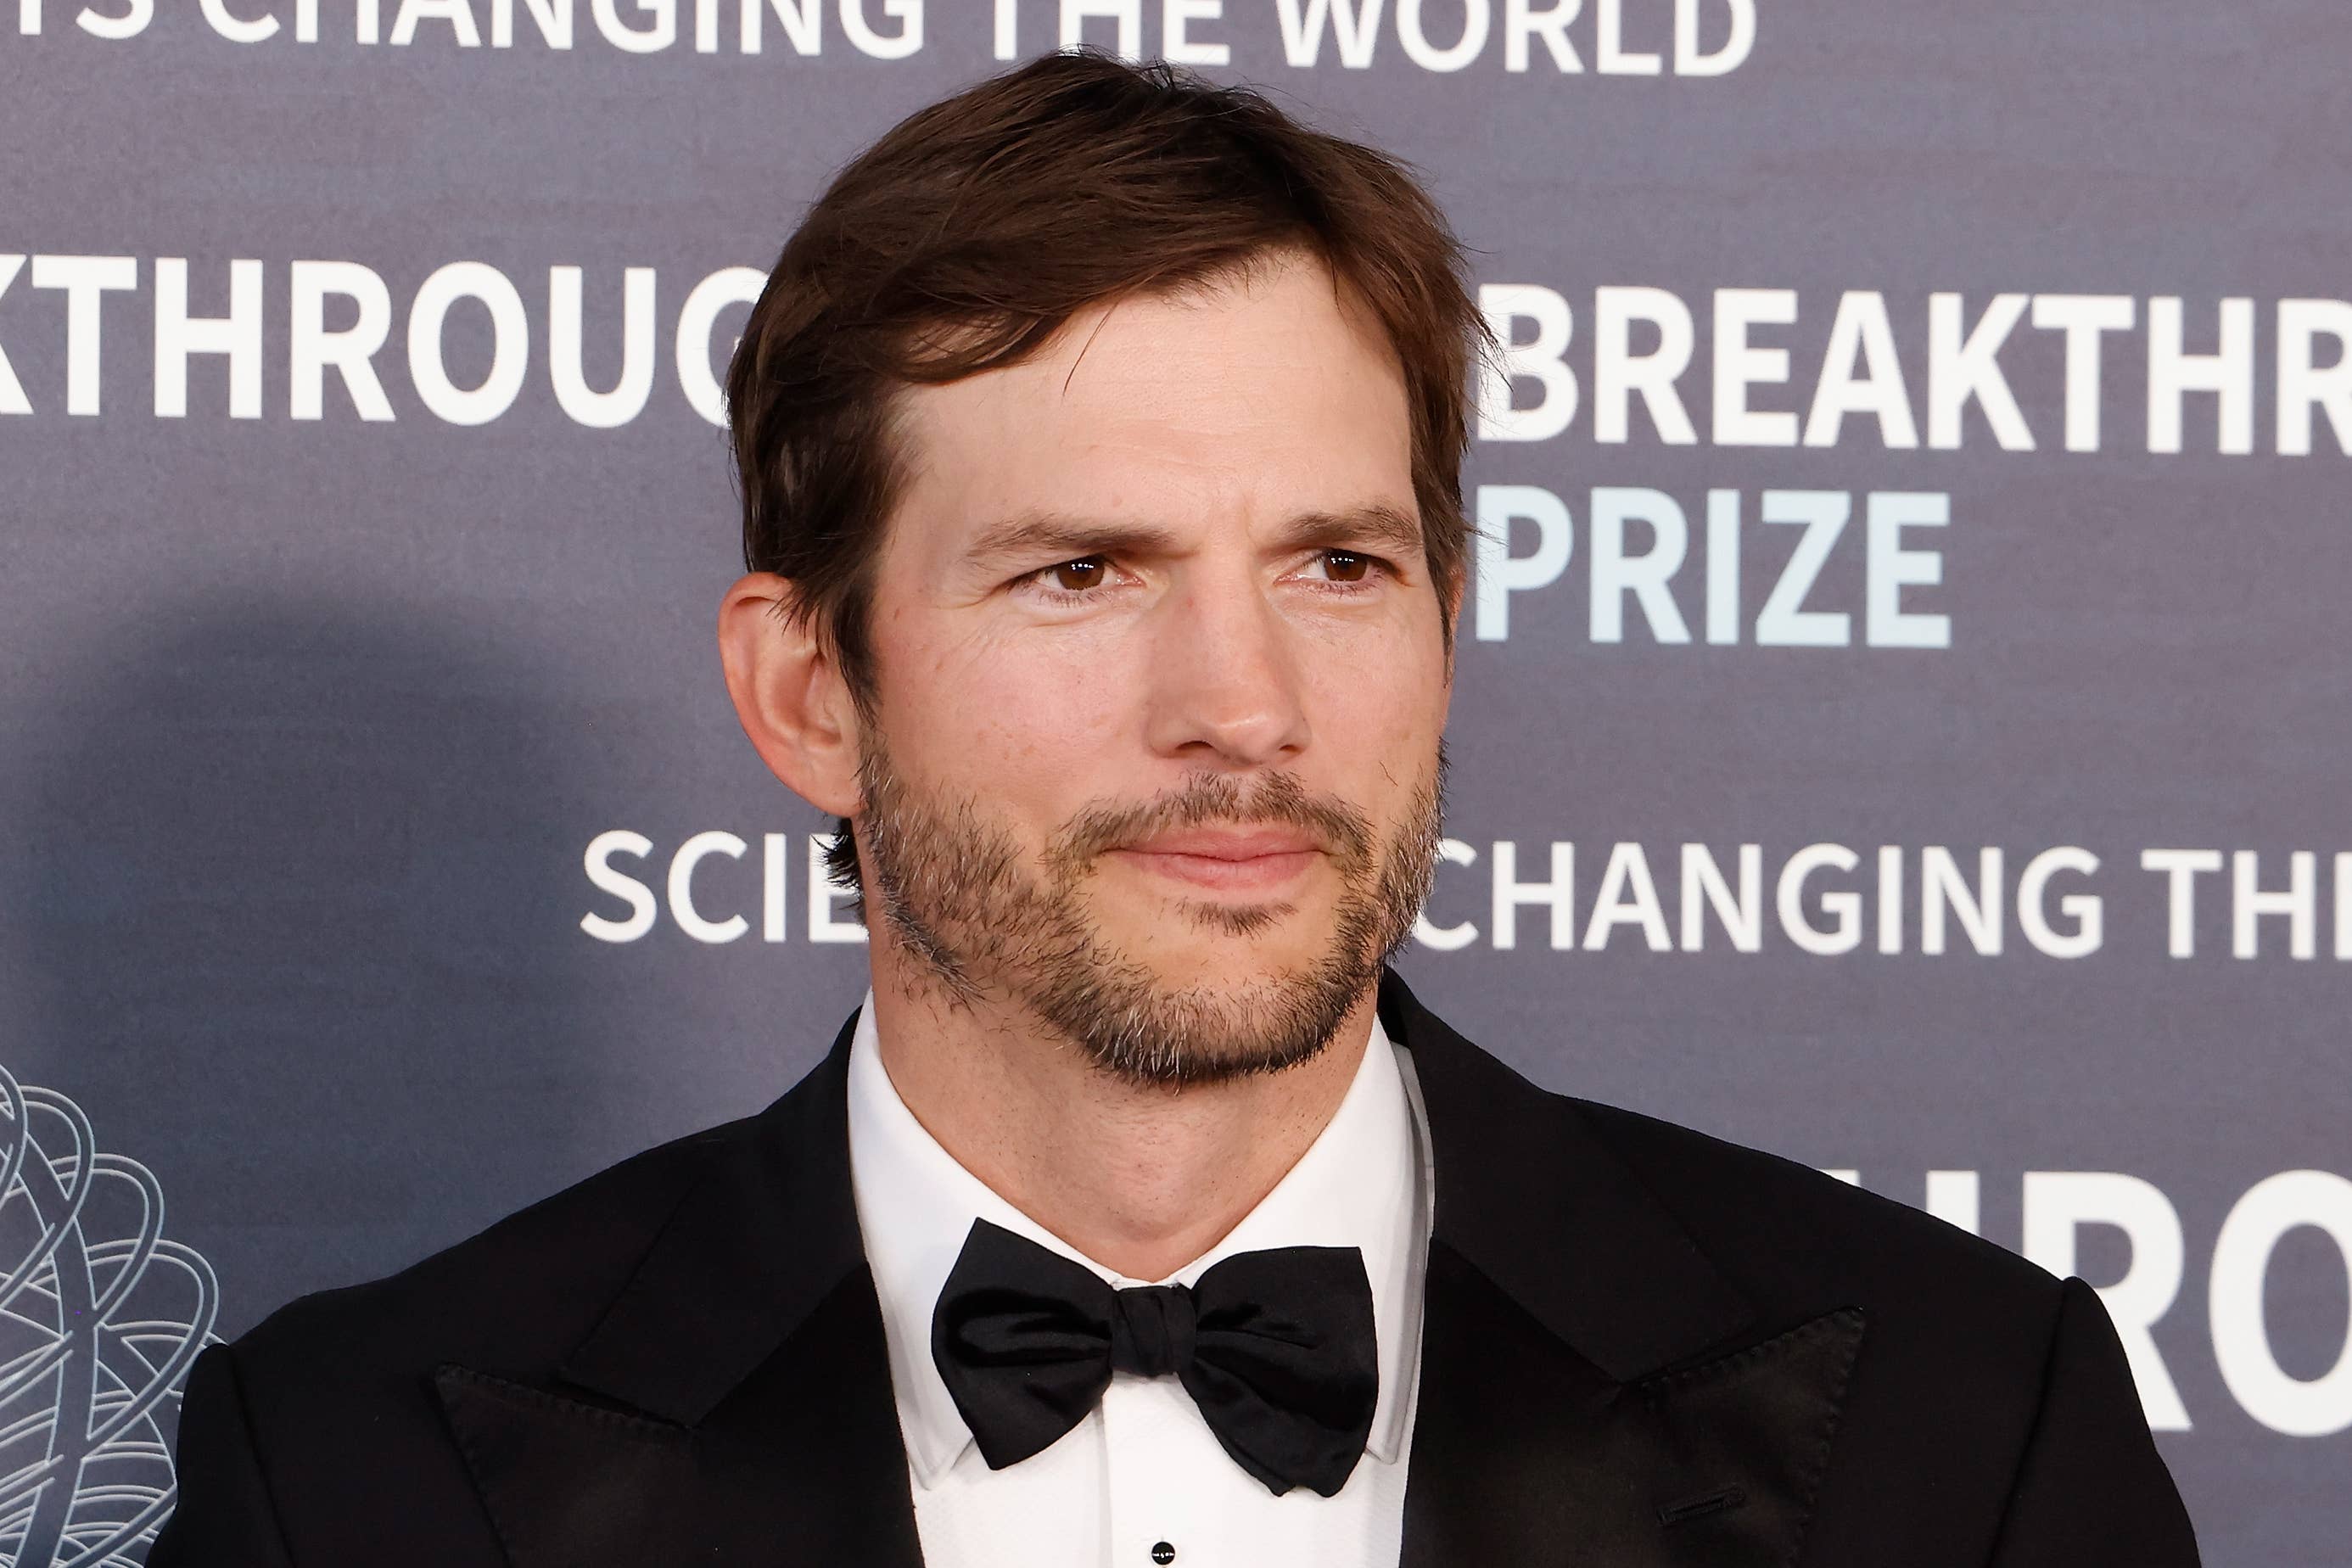 Ashton Kutcher in a tuxedo at the Breakthrough Prize event. Background text reads, "Changing the world," "Breakthrough Prize," and "Science changing the world."